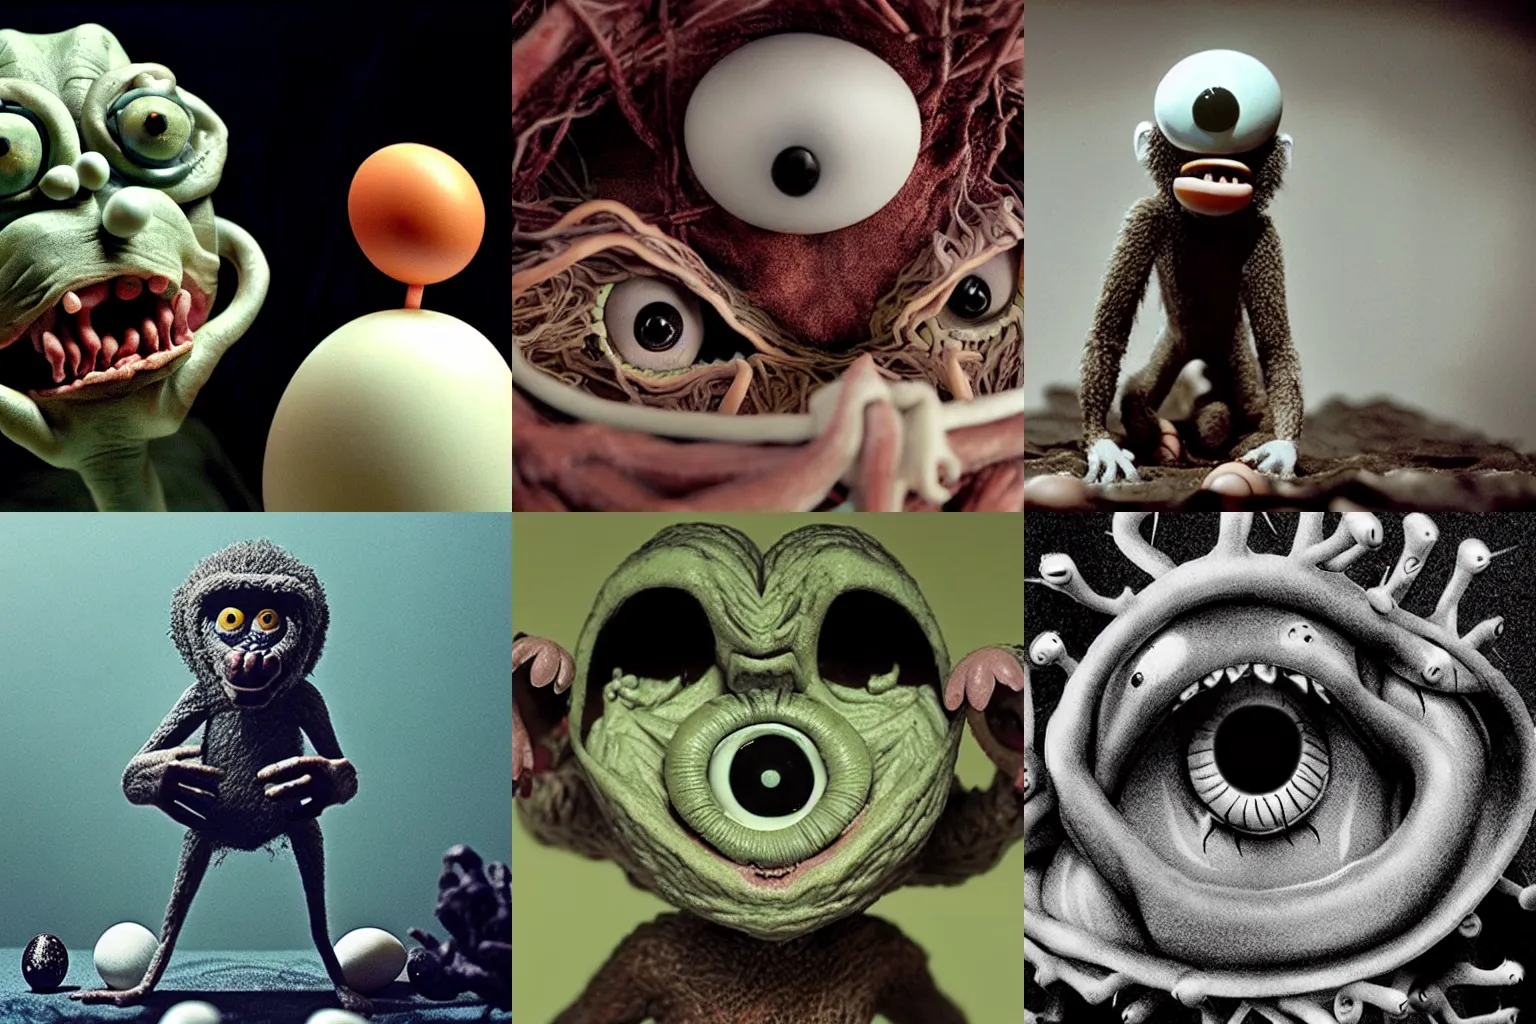 Prompt: a terrifying baboon eye monster hatches violently from an egg, minimalistic and creepy M-rated claymation film directed by Tim Burton, David Cronenberg, Junji Ito